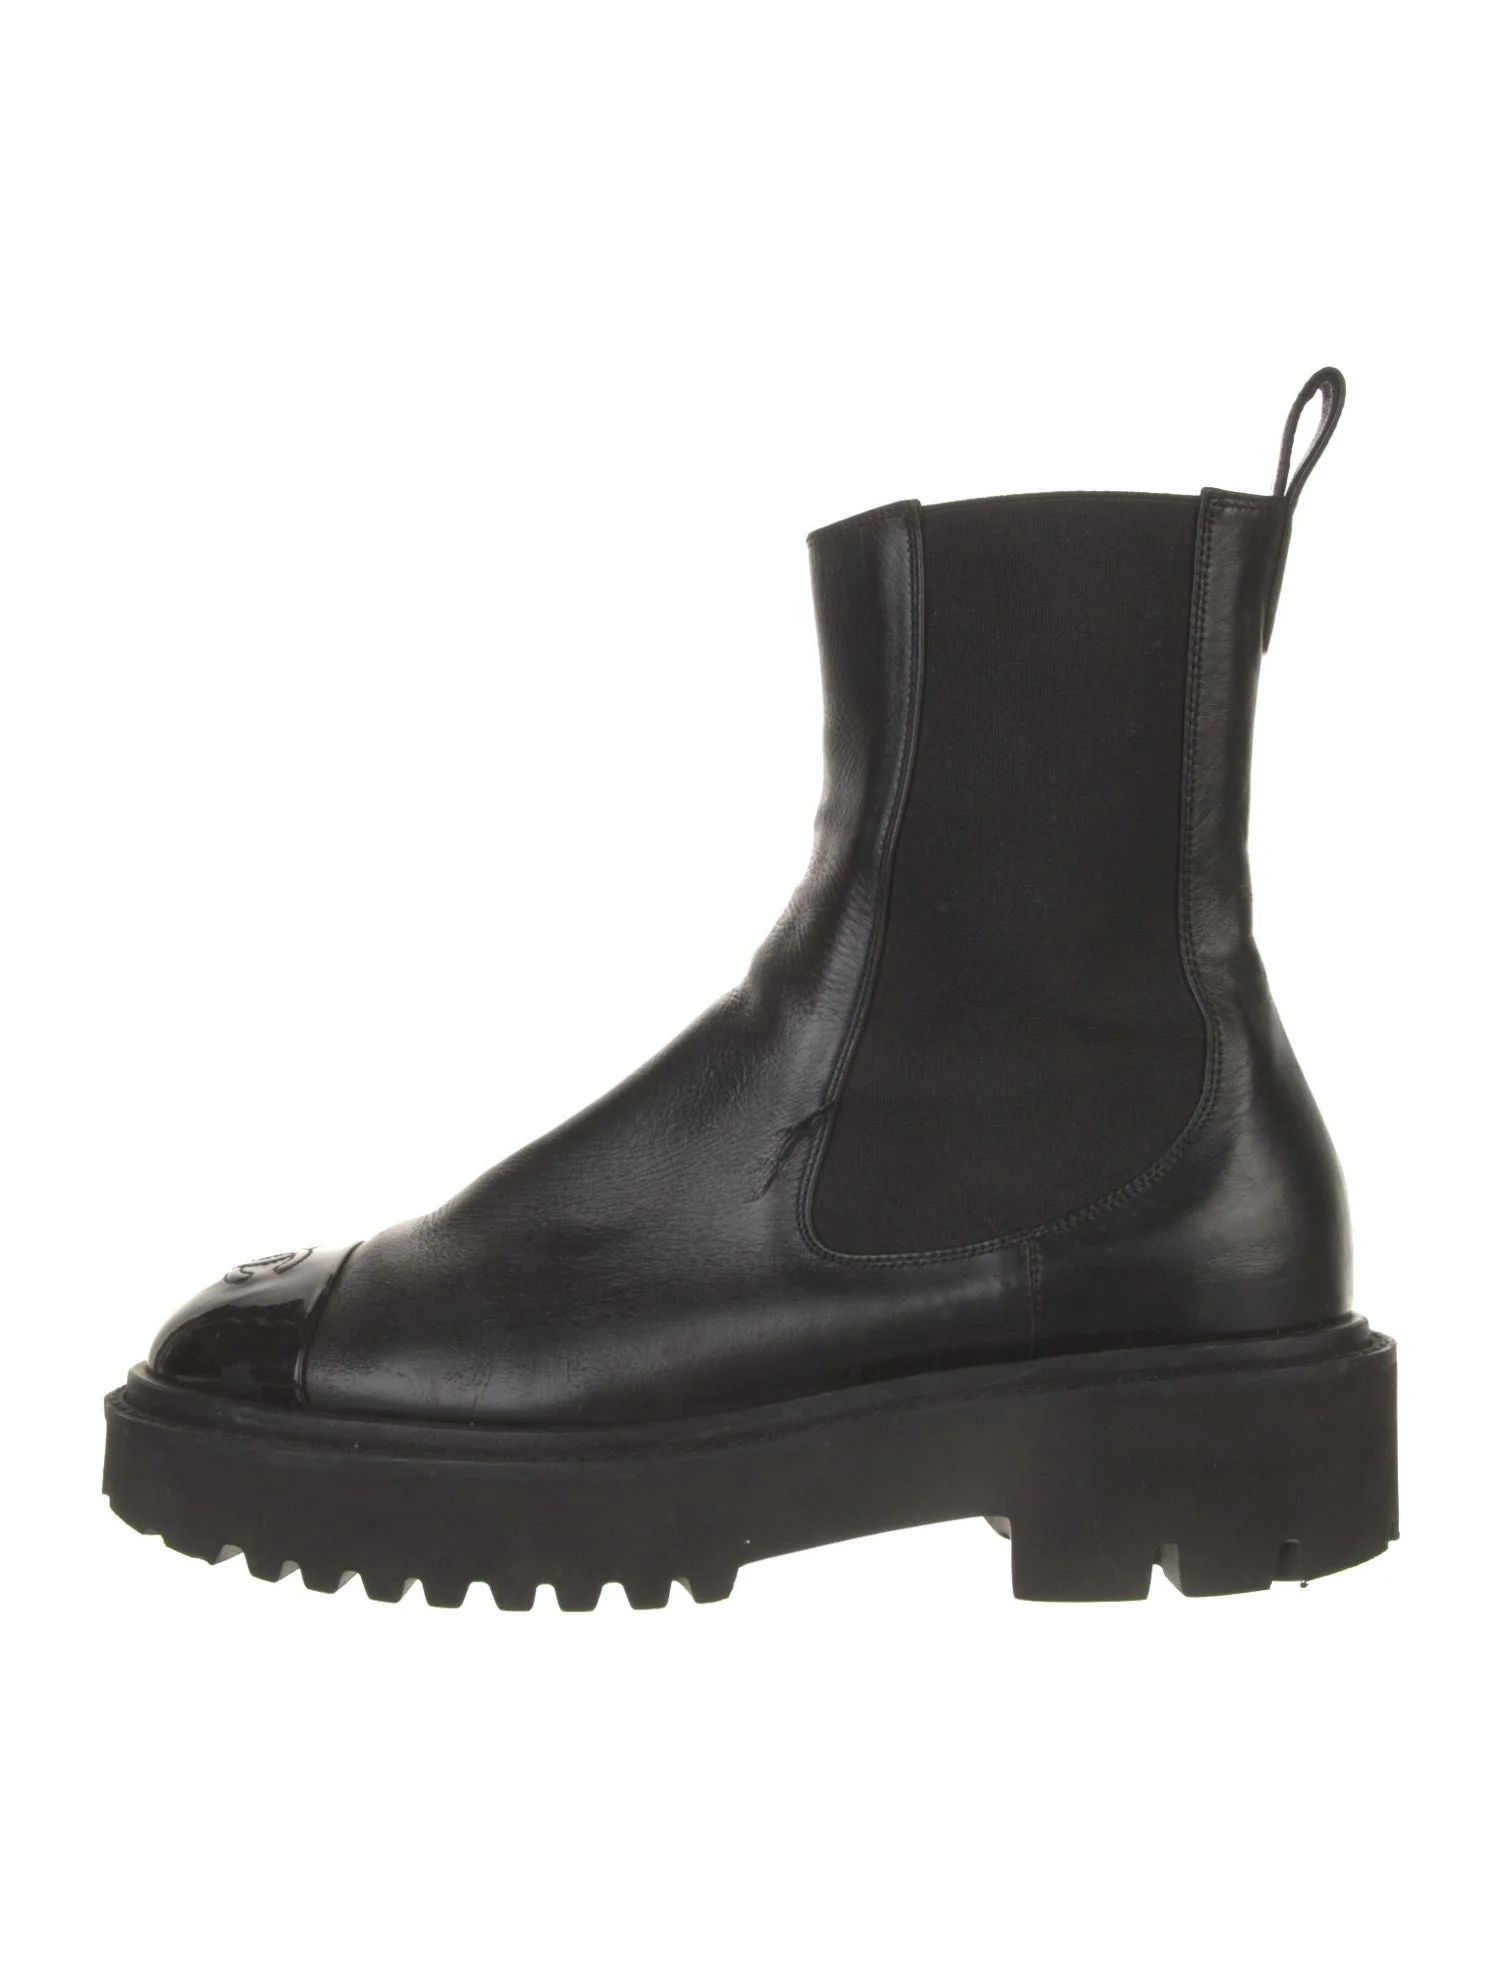 Chanel Calfskin Mid-Calf Chelsea Boots | The RealReal